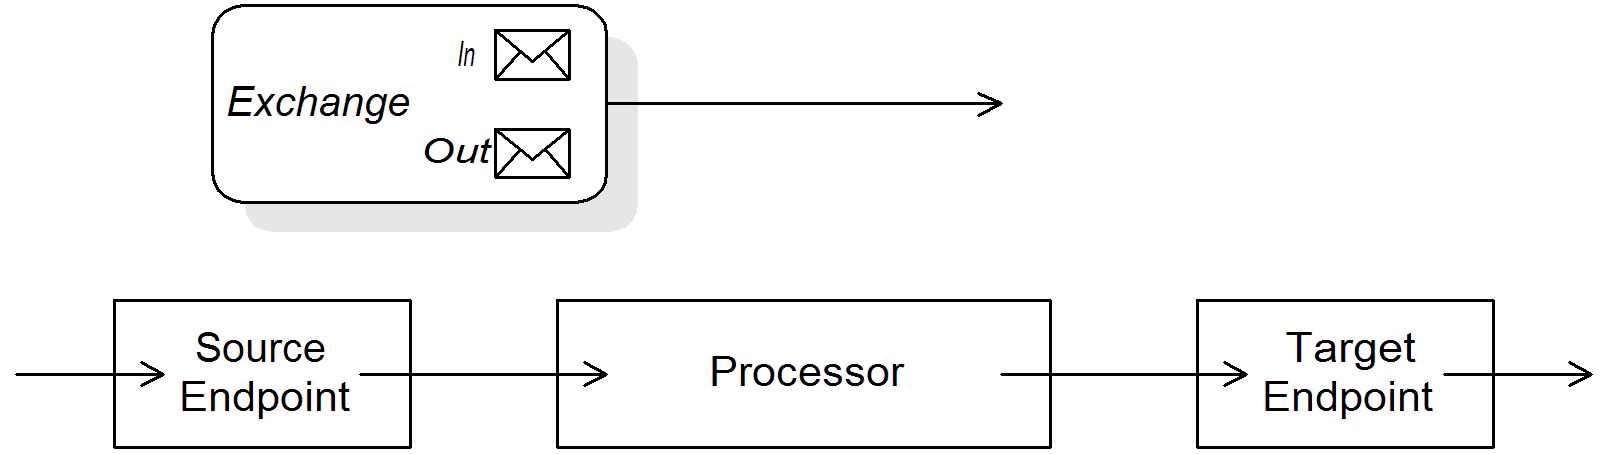 Exchange object passing through a route